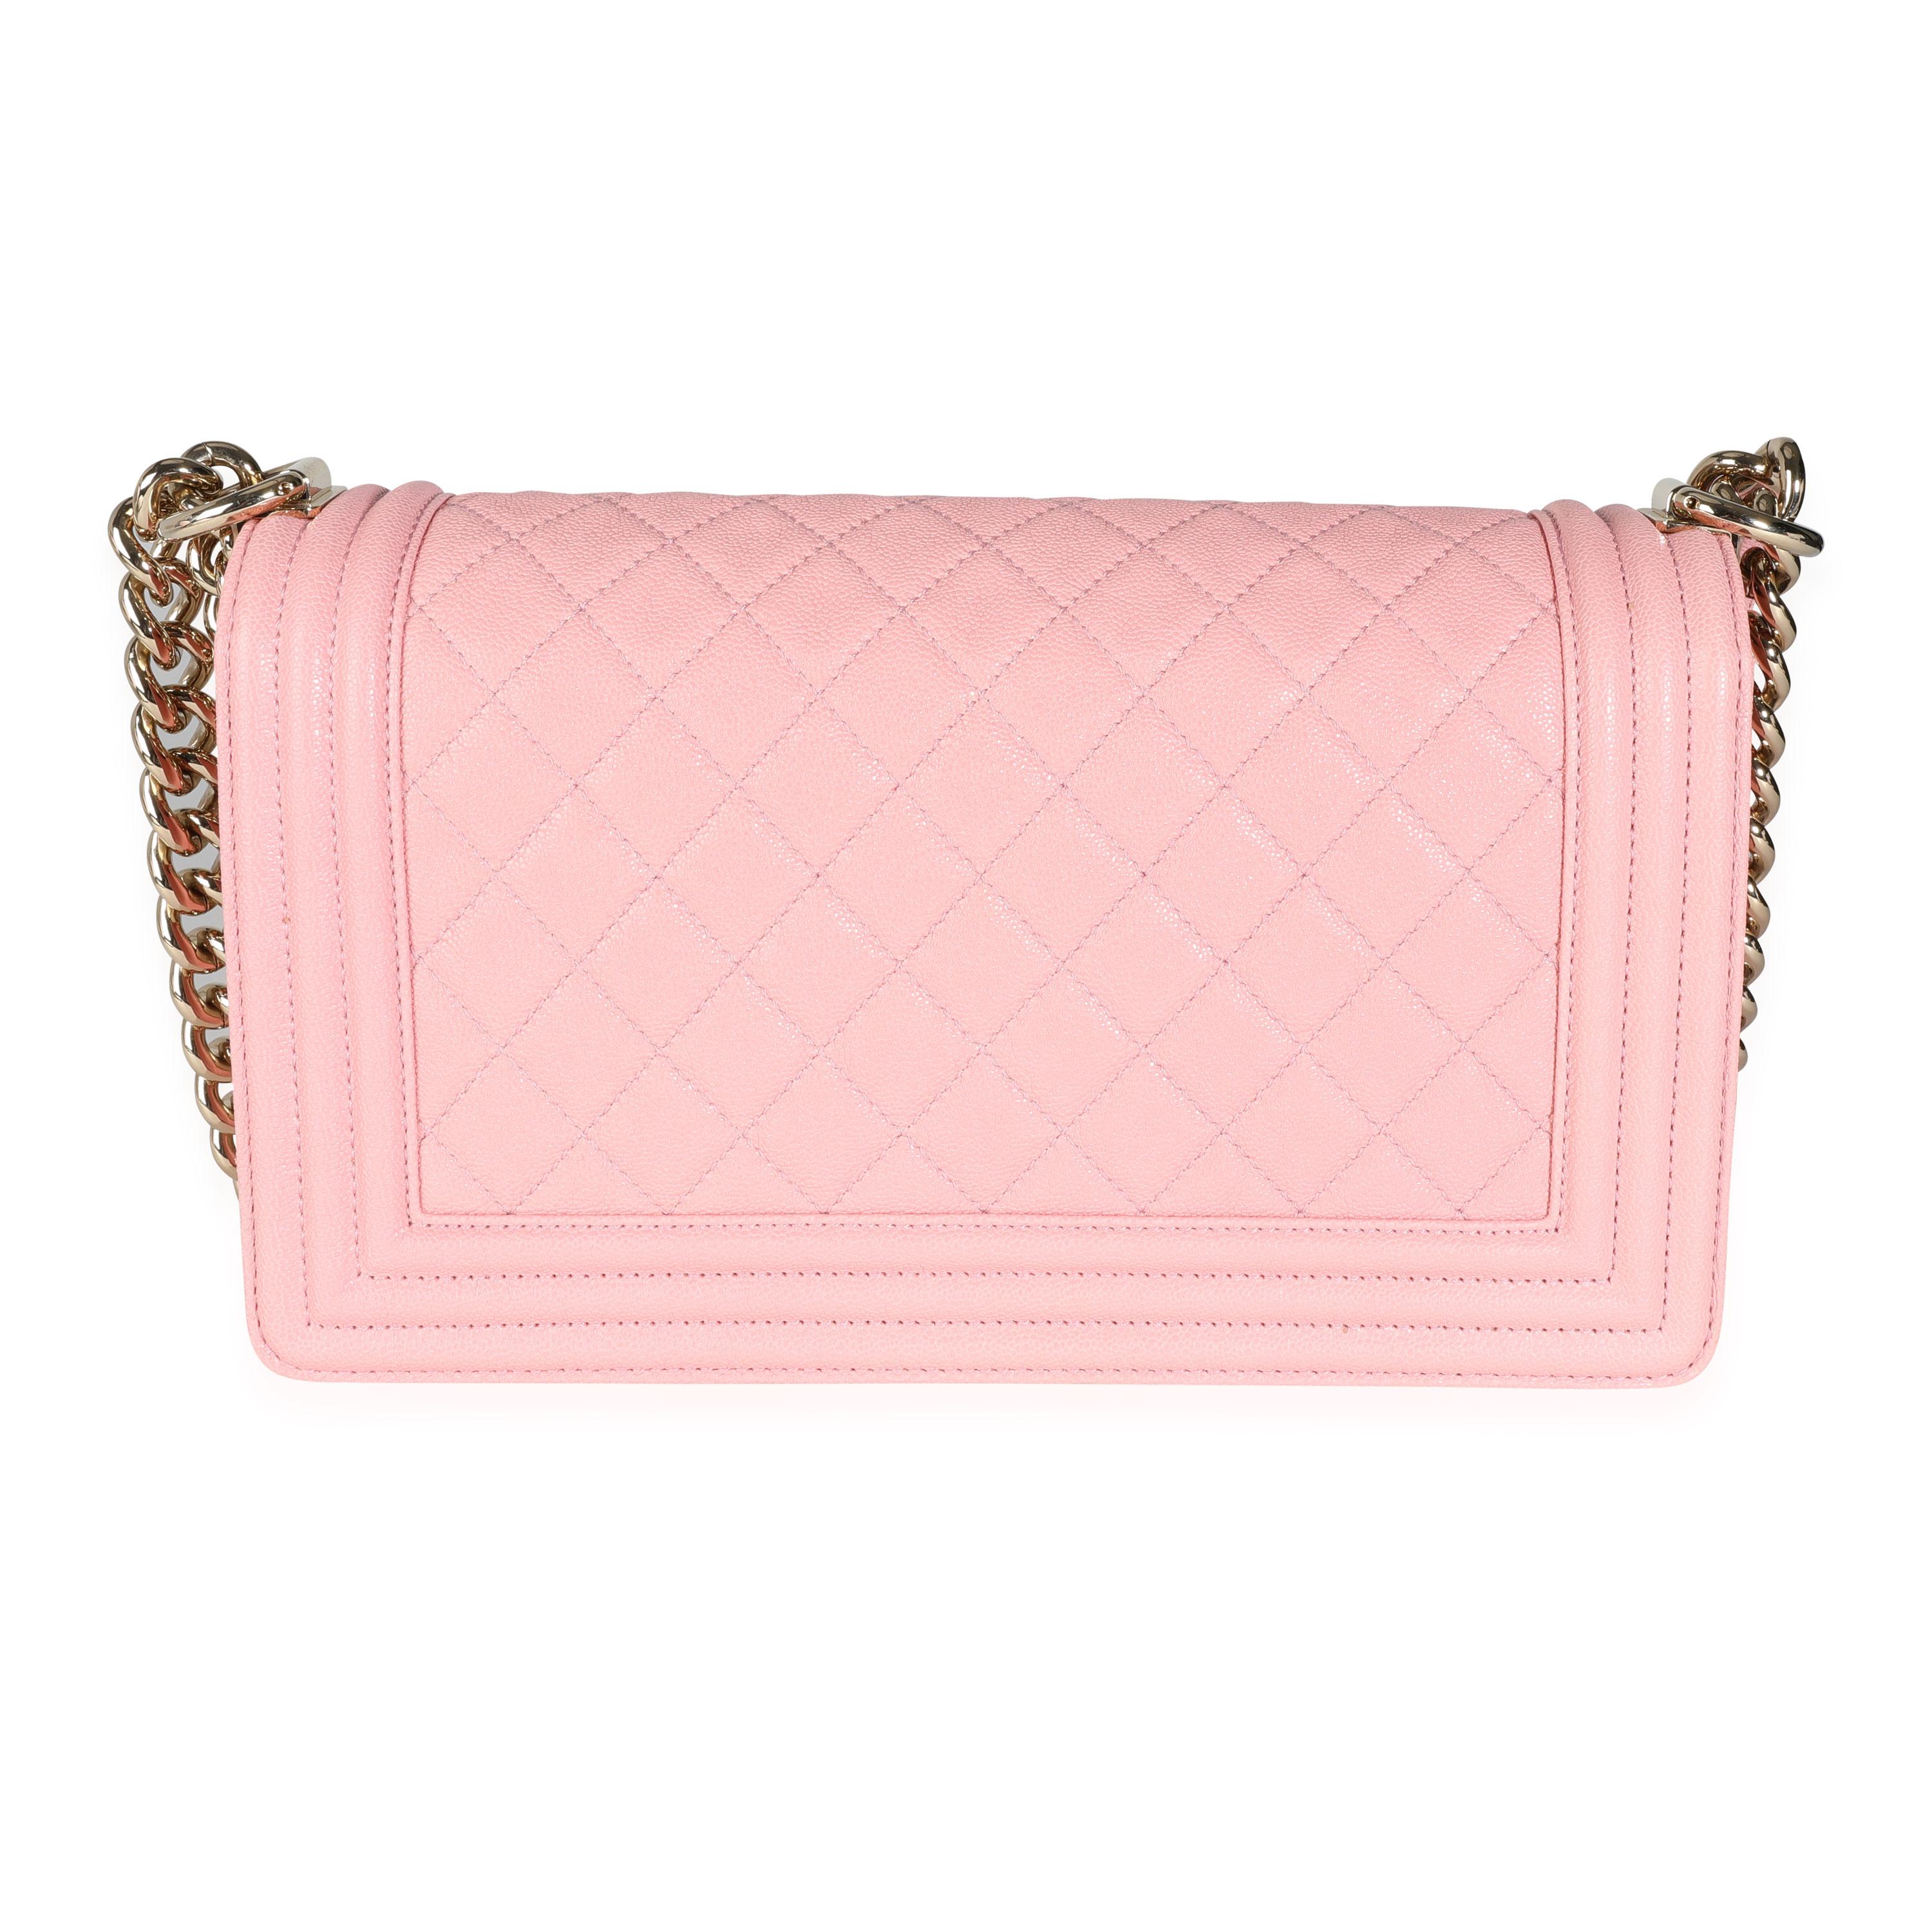 Listing Title: Chanel Pink Caviar Quilted Medium Boy Bag
SKU: 115443
Condition: Pre-owned (3000)
Handbag Condition: Excellent
Condition Comments: Excellent Condition. Plastic on hardware. Scratching to hardware. No other visible signs of